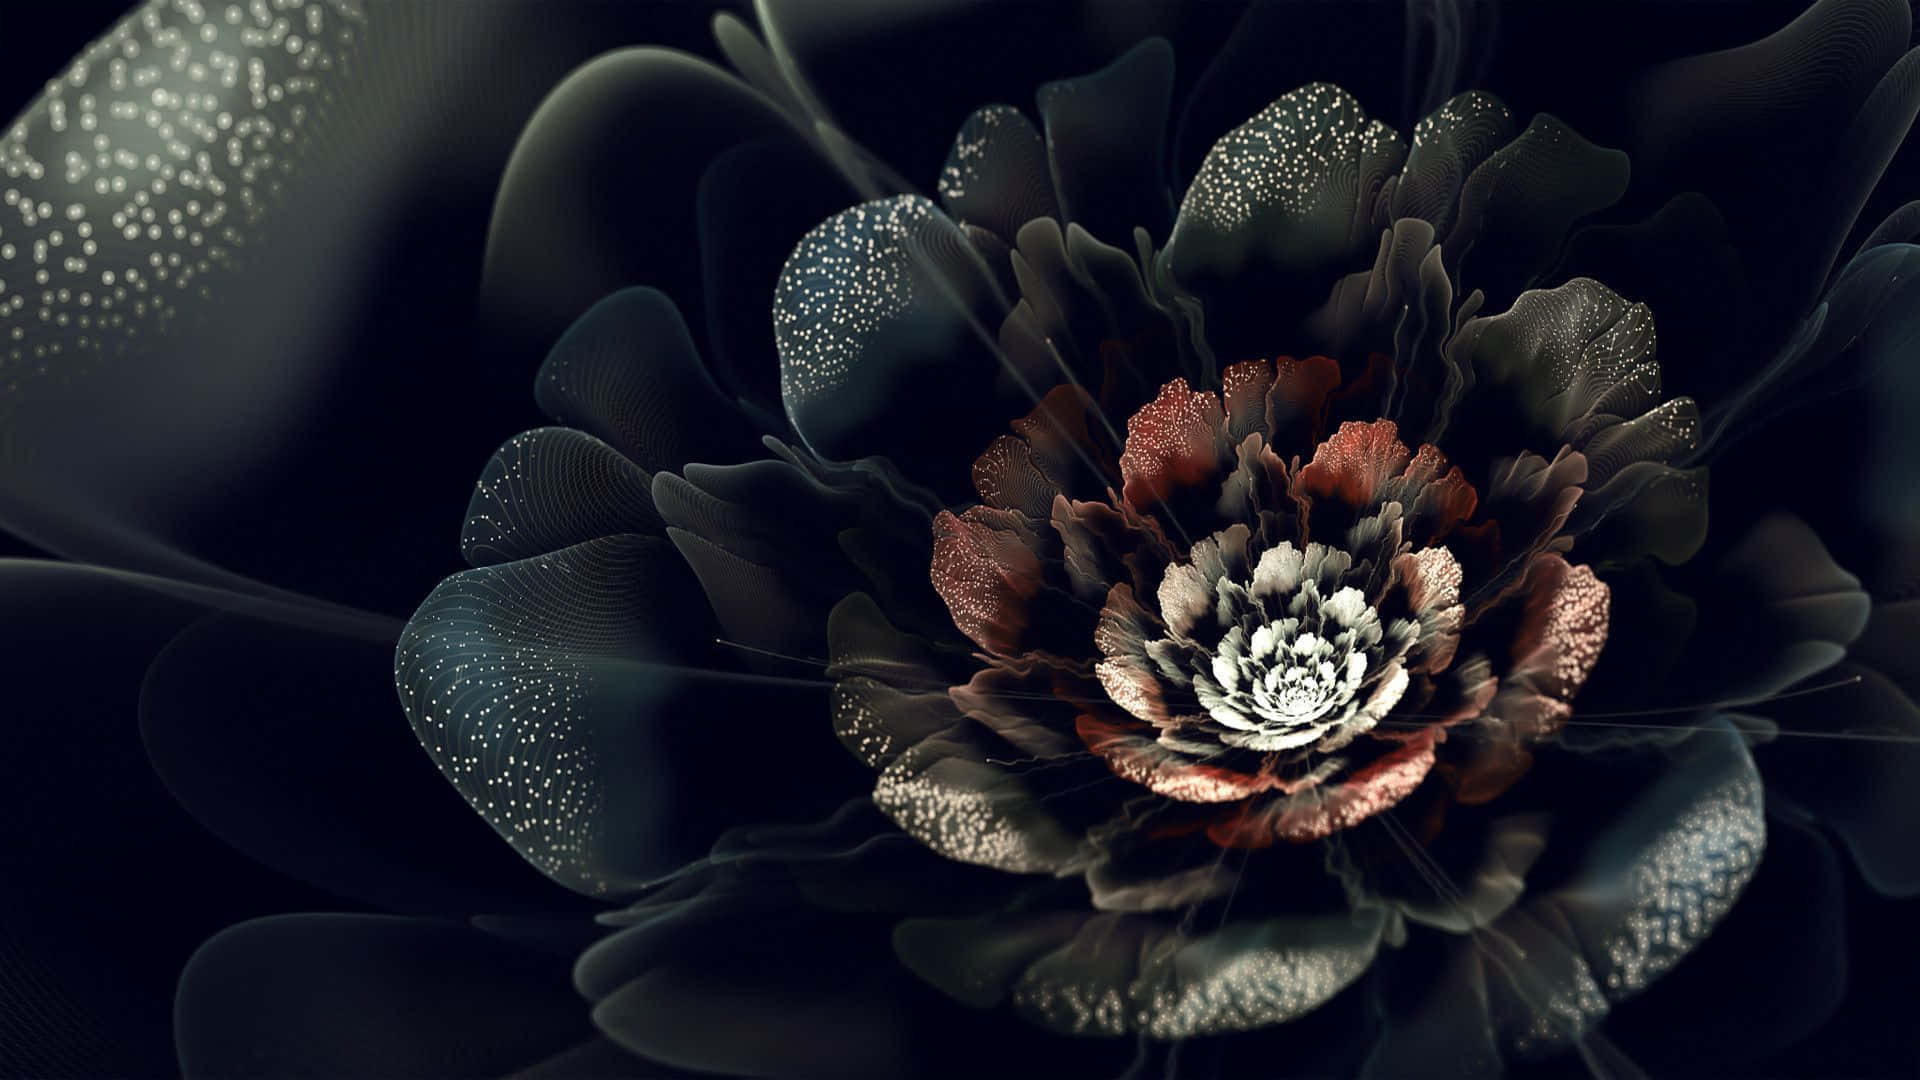 Gothic Flowers With Black Petals Background